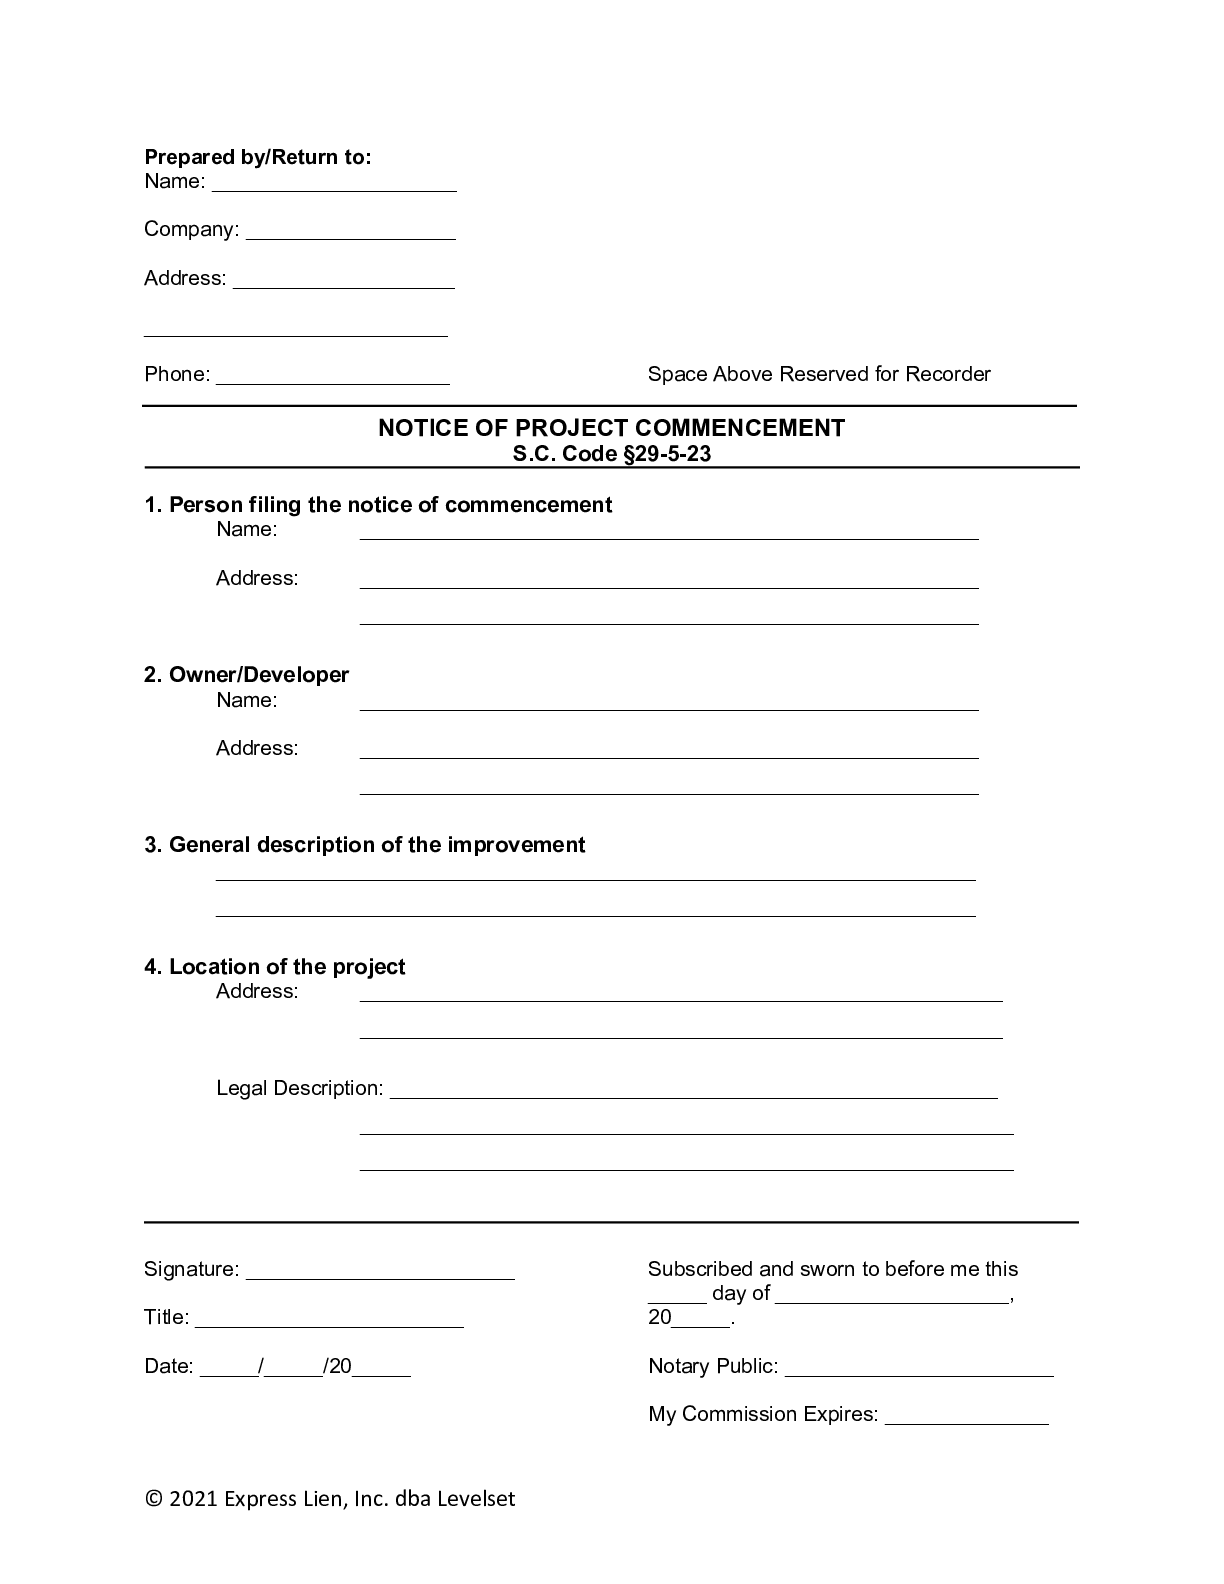 South Carolina Notice of Project Commencement Form - free from